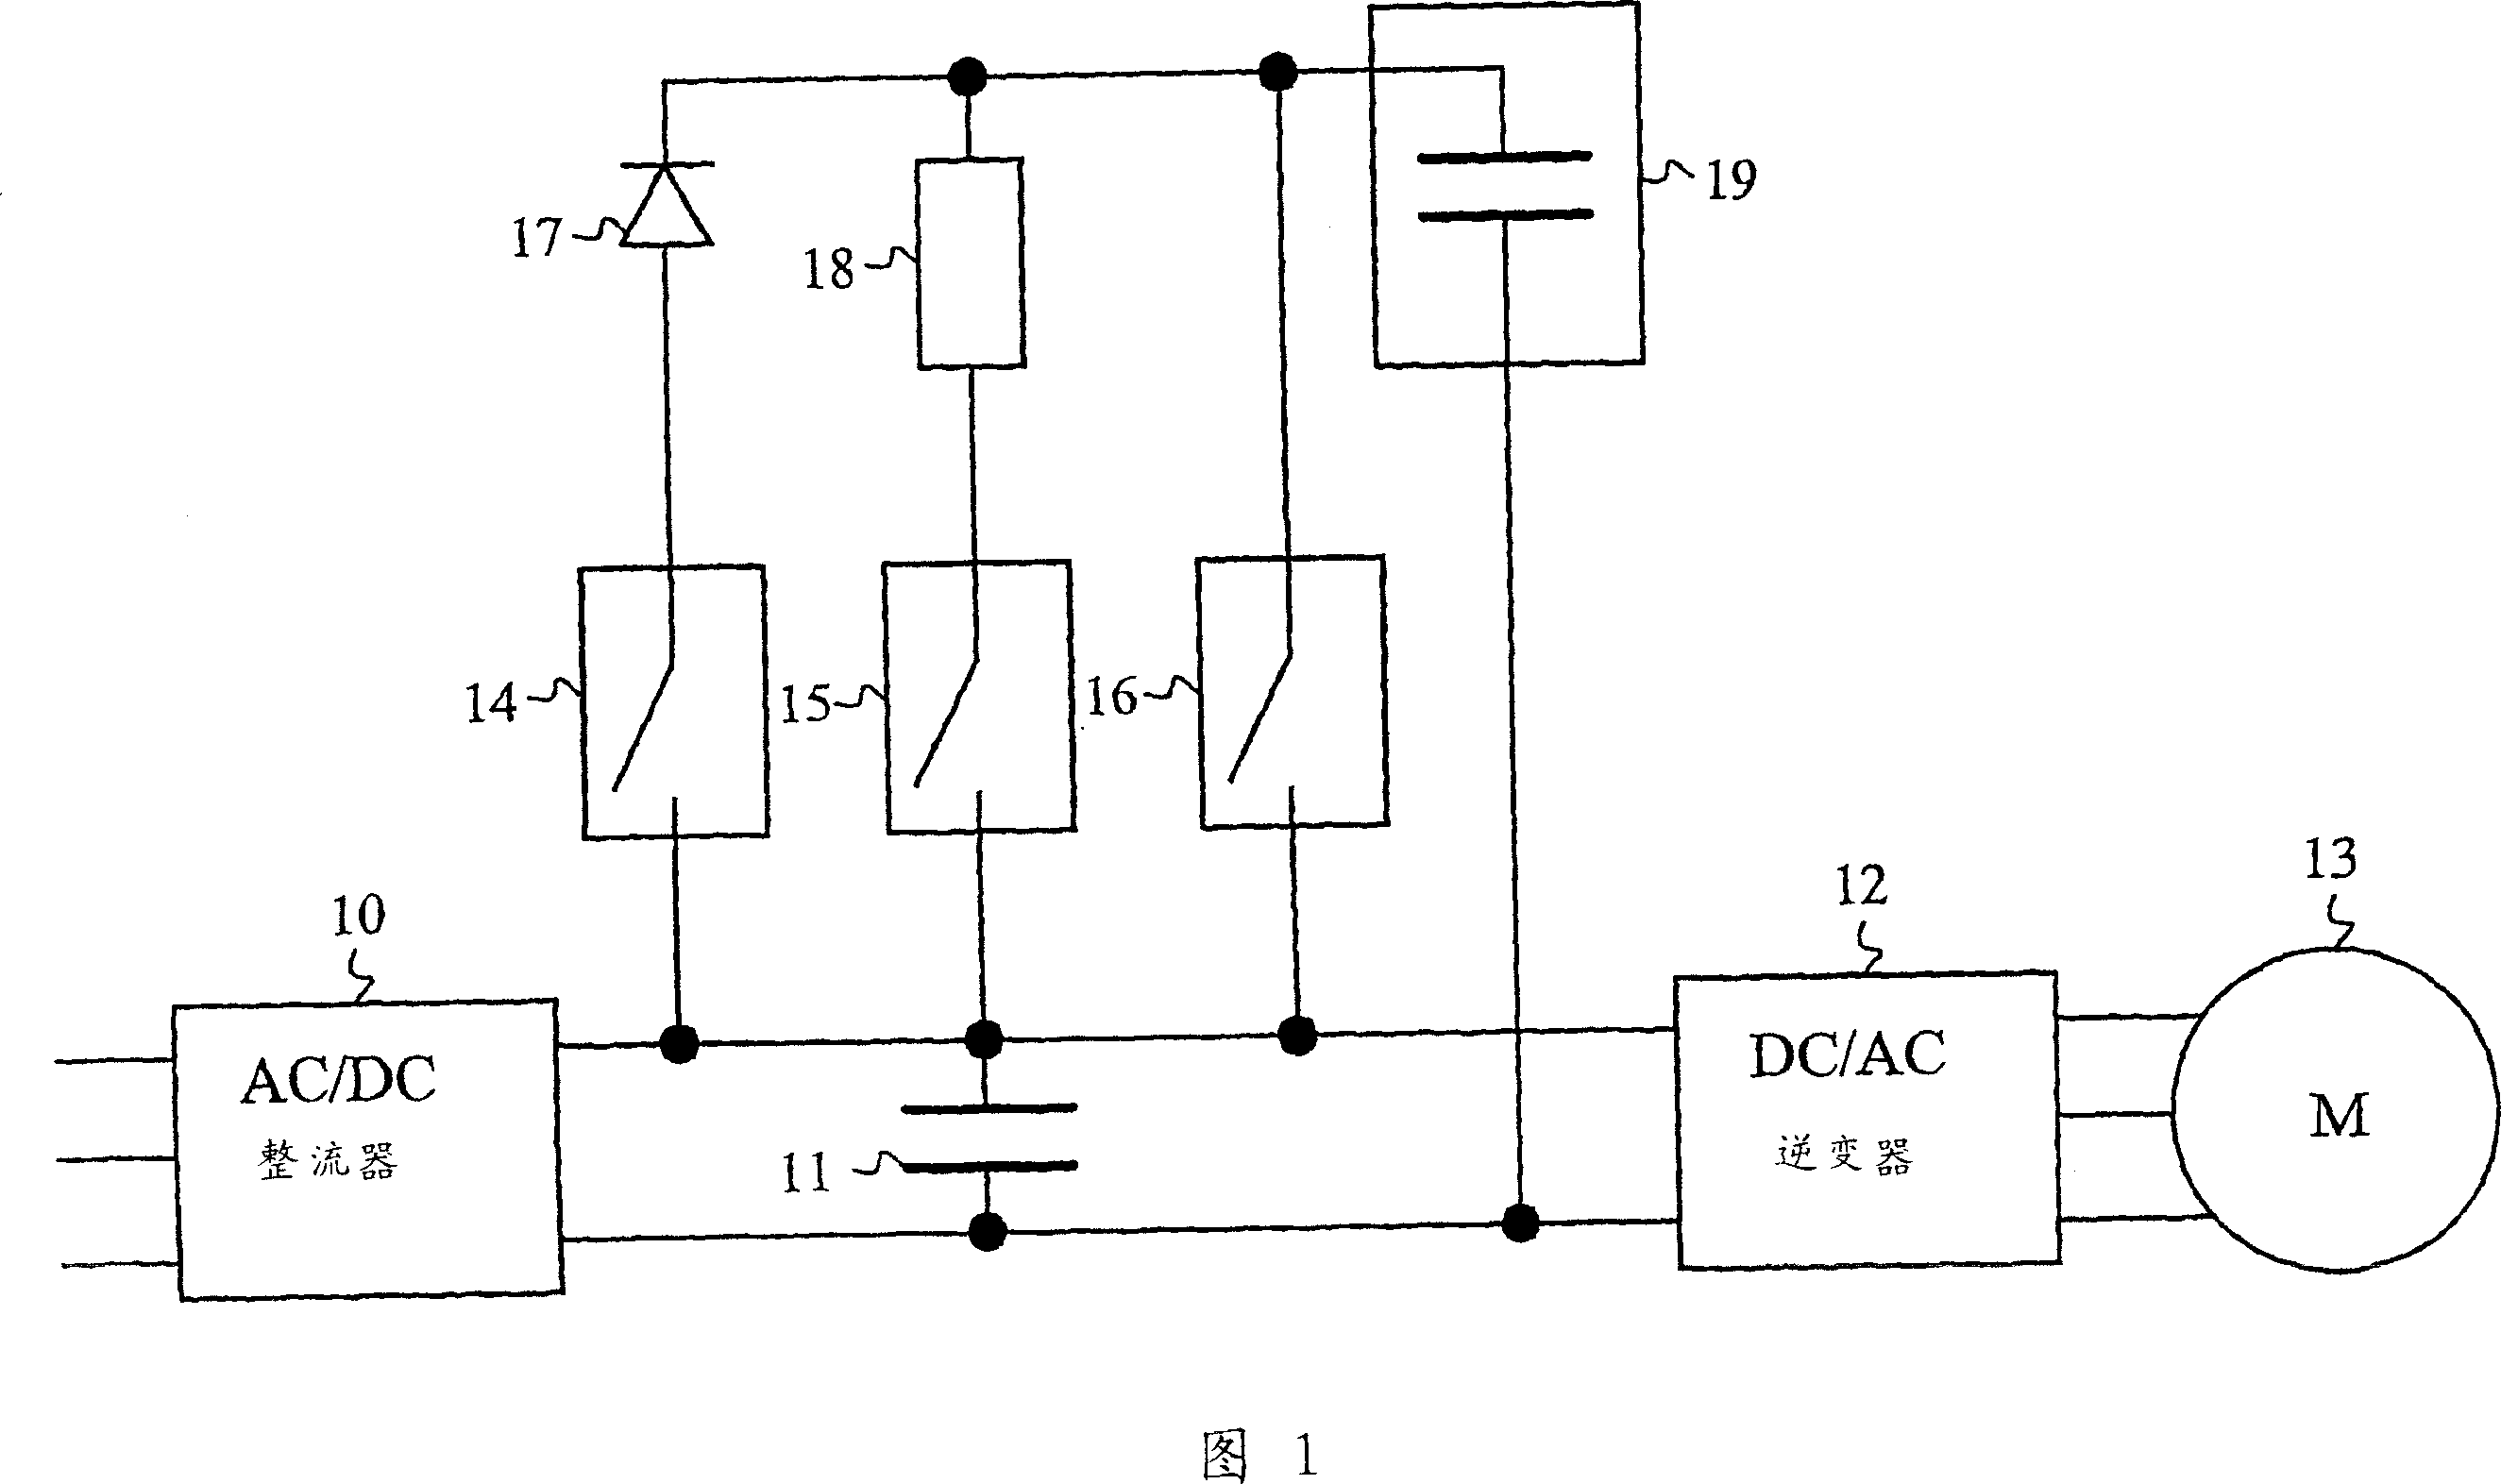 Power source as an energy saver and emergency power source in an elevator system